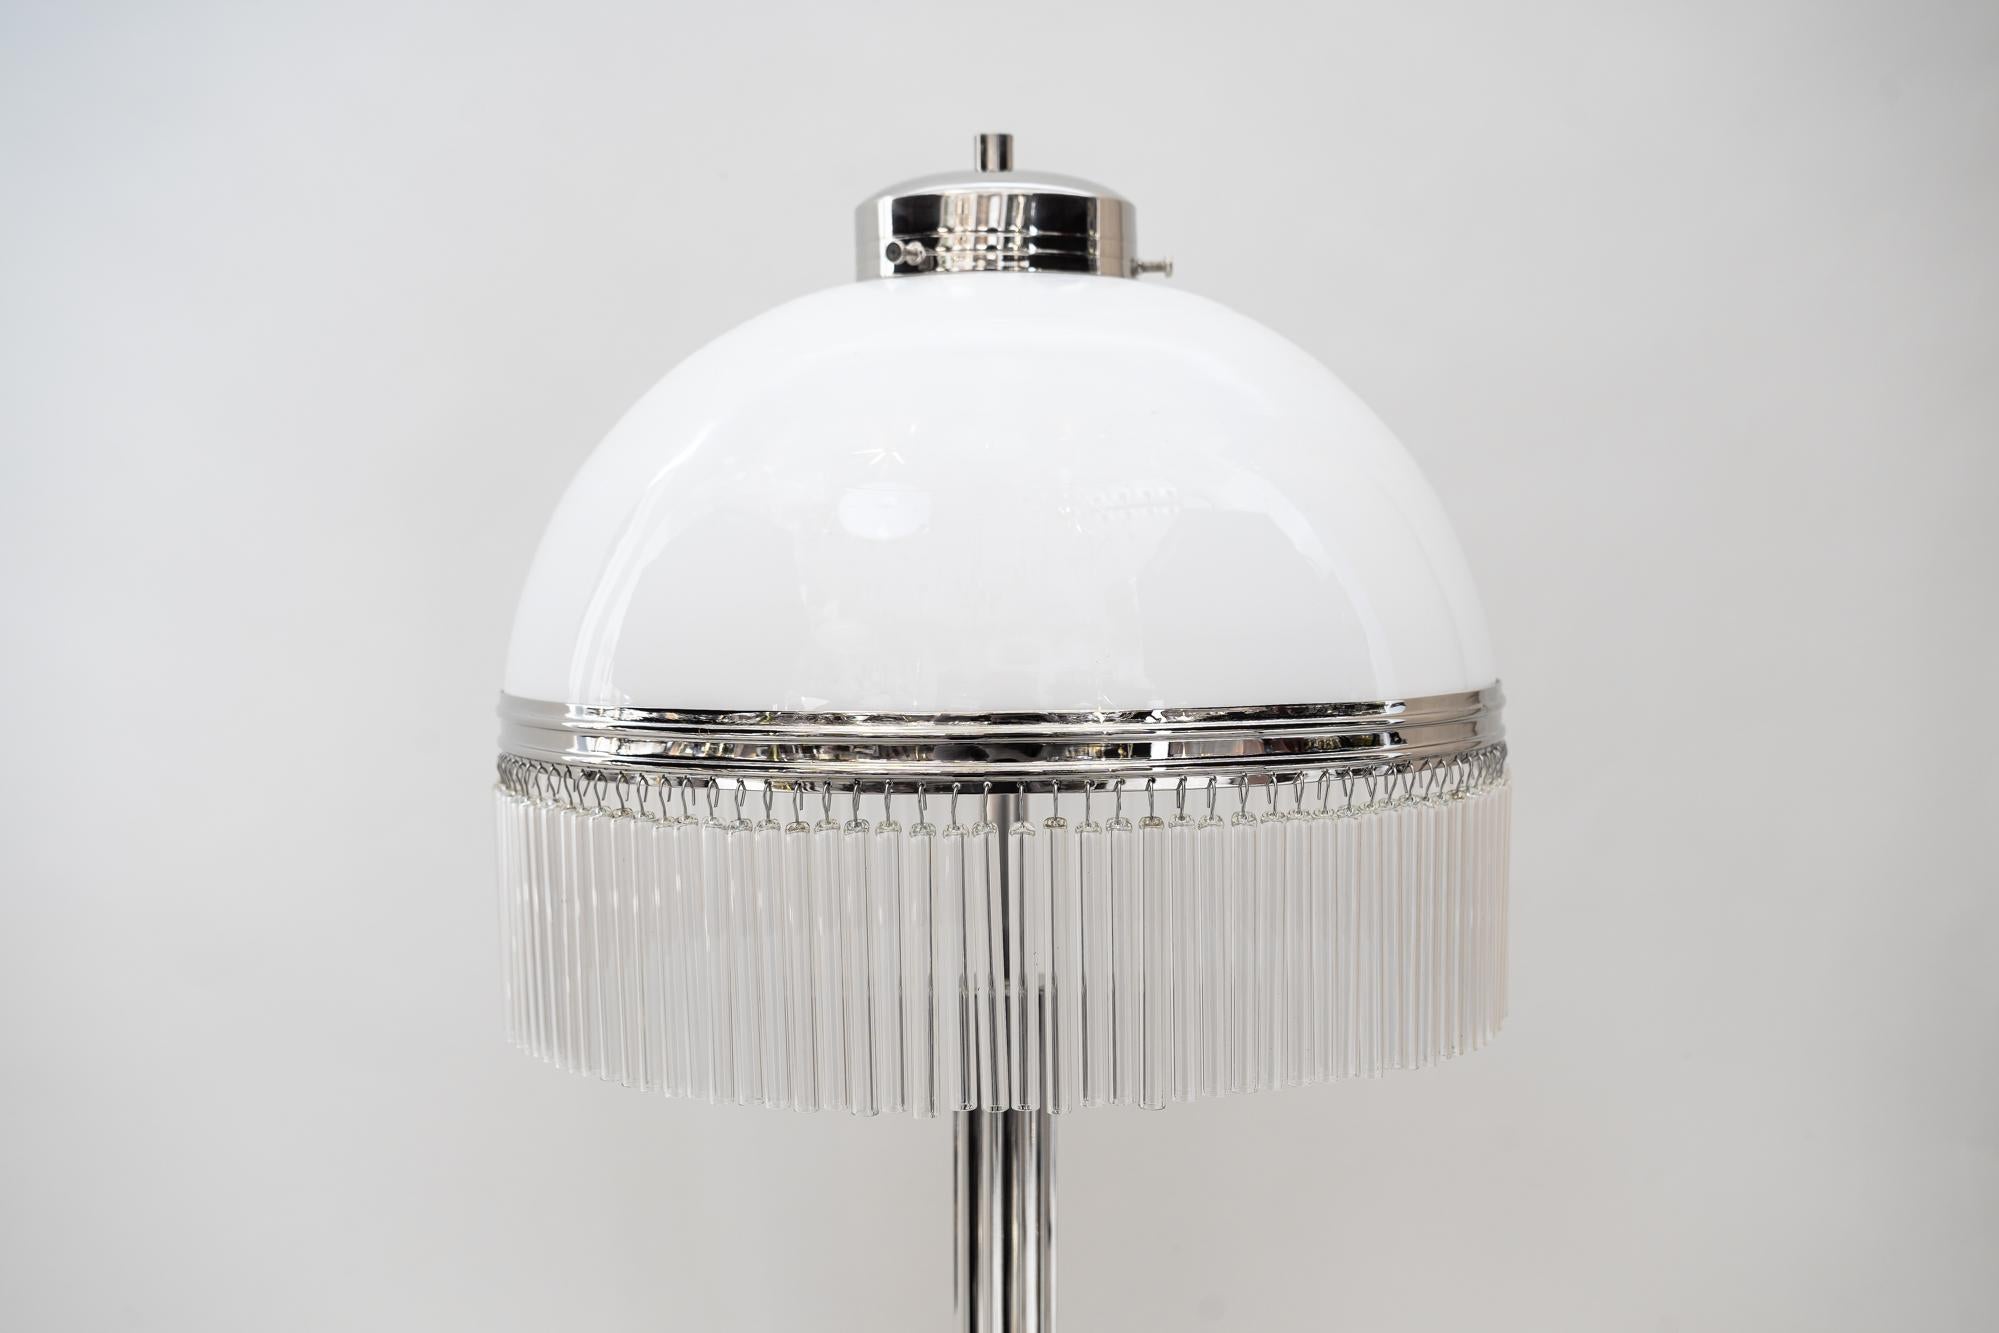 Big Art Deco table lamp nickel-plated with original satined opal glas, 1920s
Nickel-plated
Glass sticks are replaced (new).